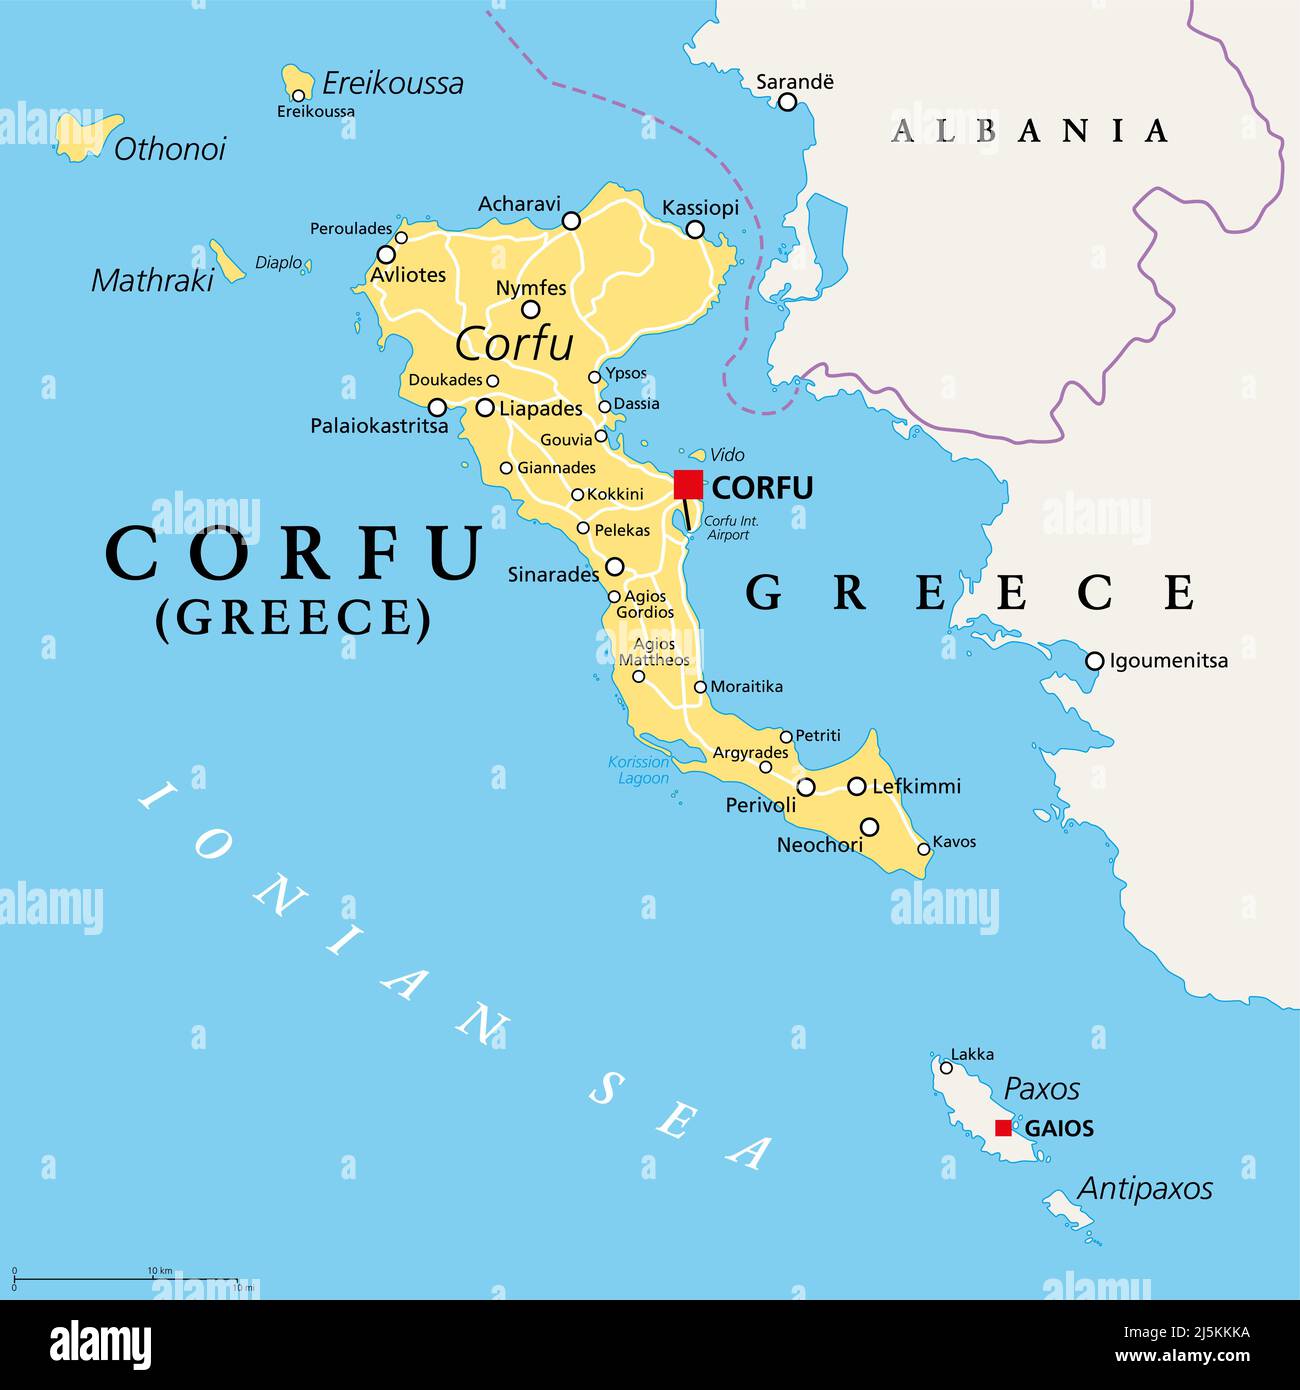 Corfu, island of Greece, political map. Also known as Kerkyra, a Greek island in the Ionian Sea and part of the Ionian Islands. Stock Photo